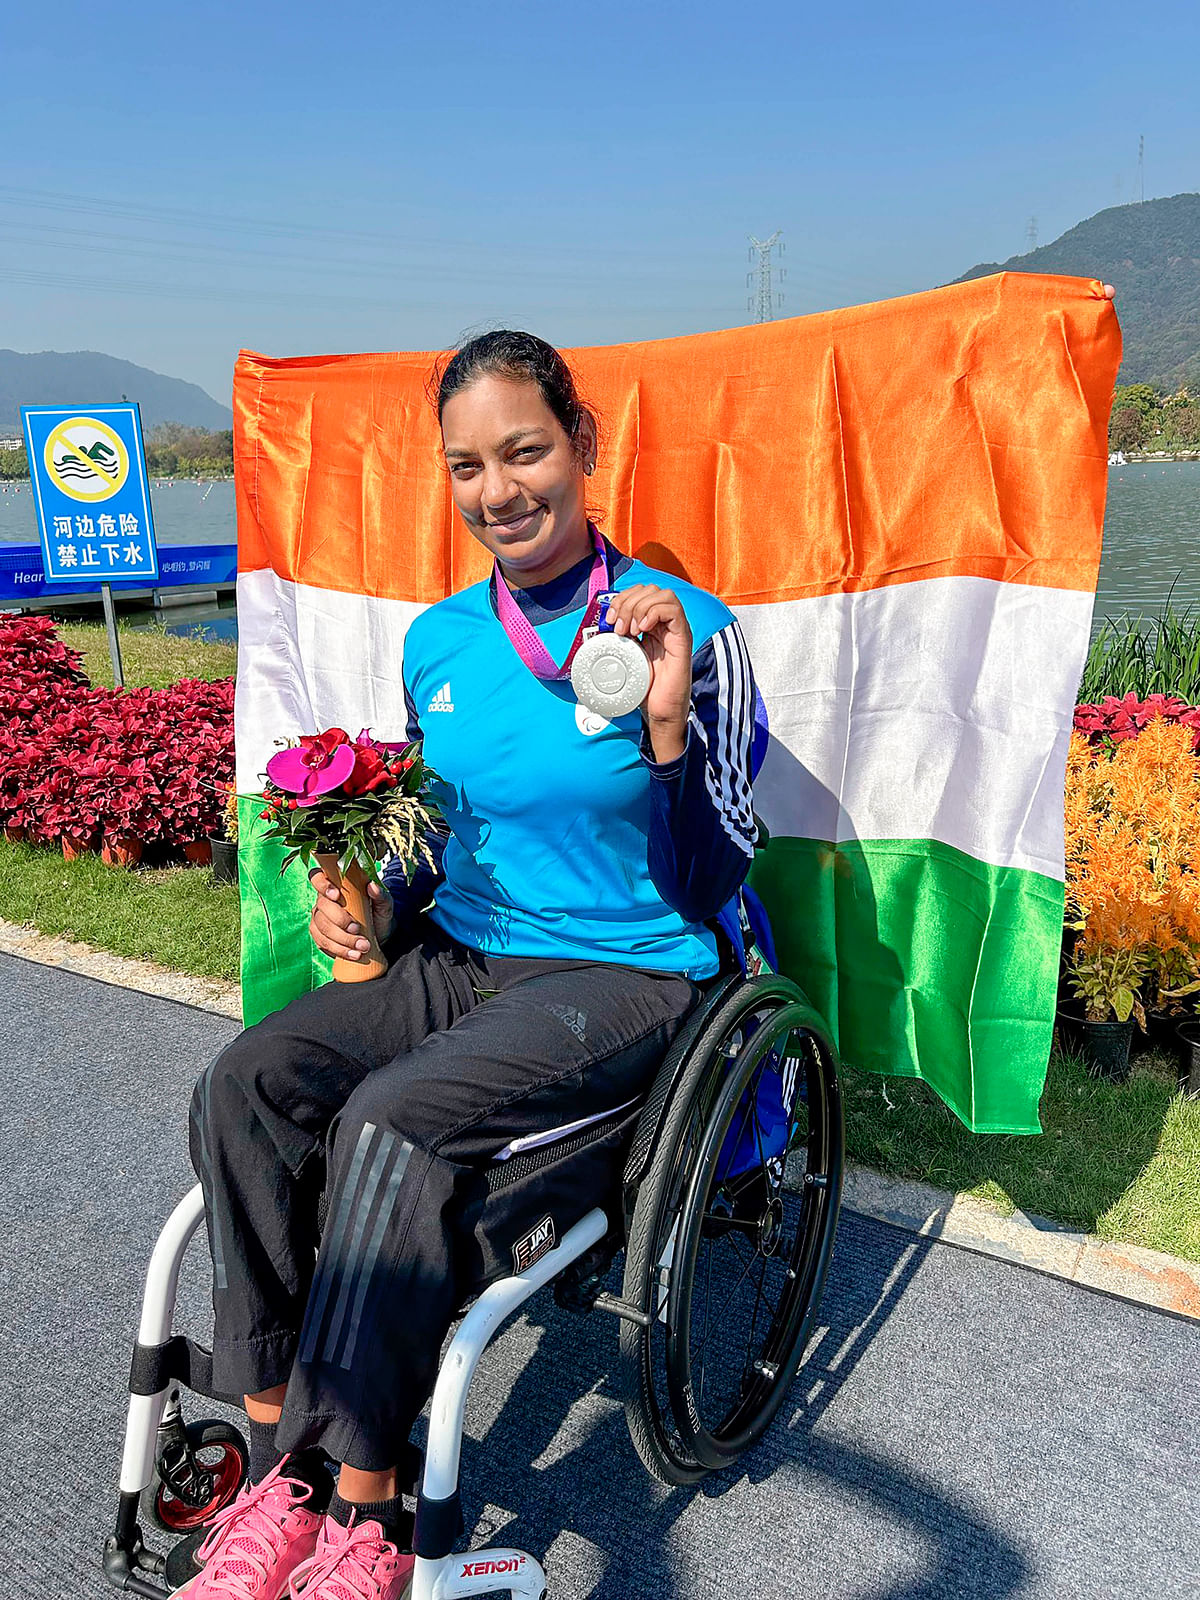 India won 17 medals on the opening day of the Asian Para Games in Hangzhou on Monday.